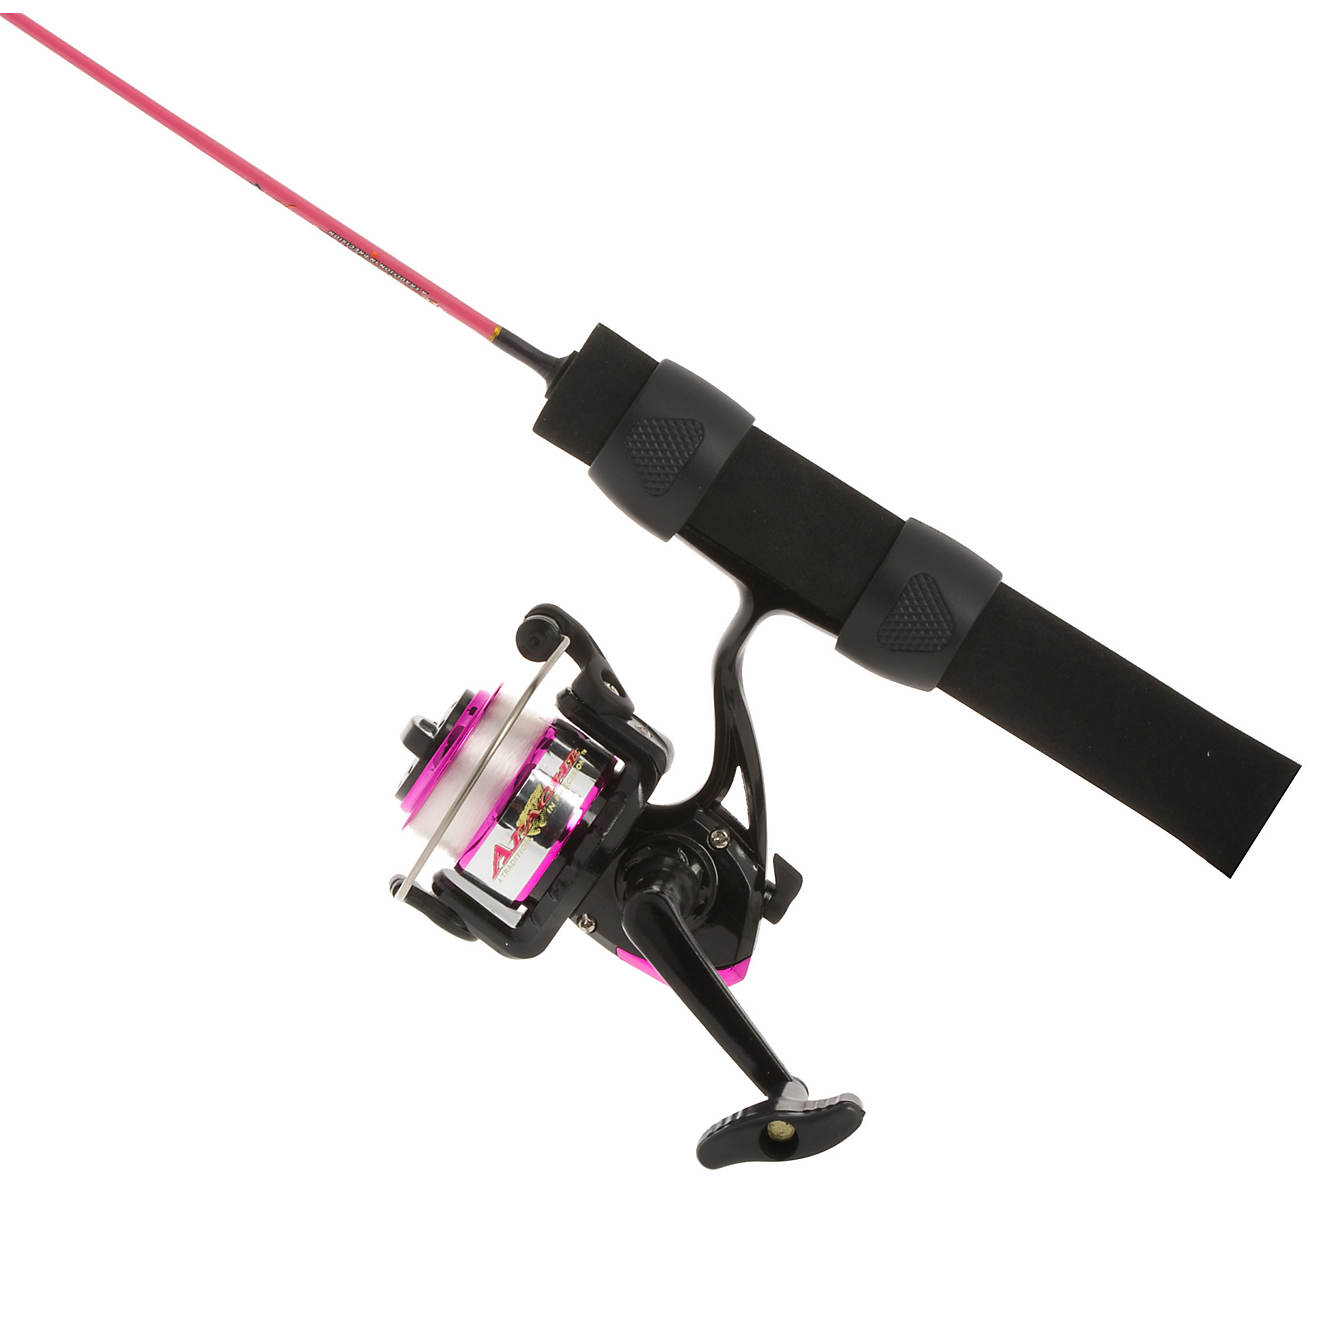 Apache Mini 2' UL Freshwater Spinning Rod and Reel Combo